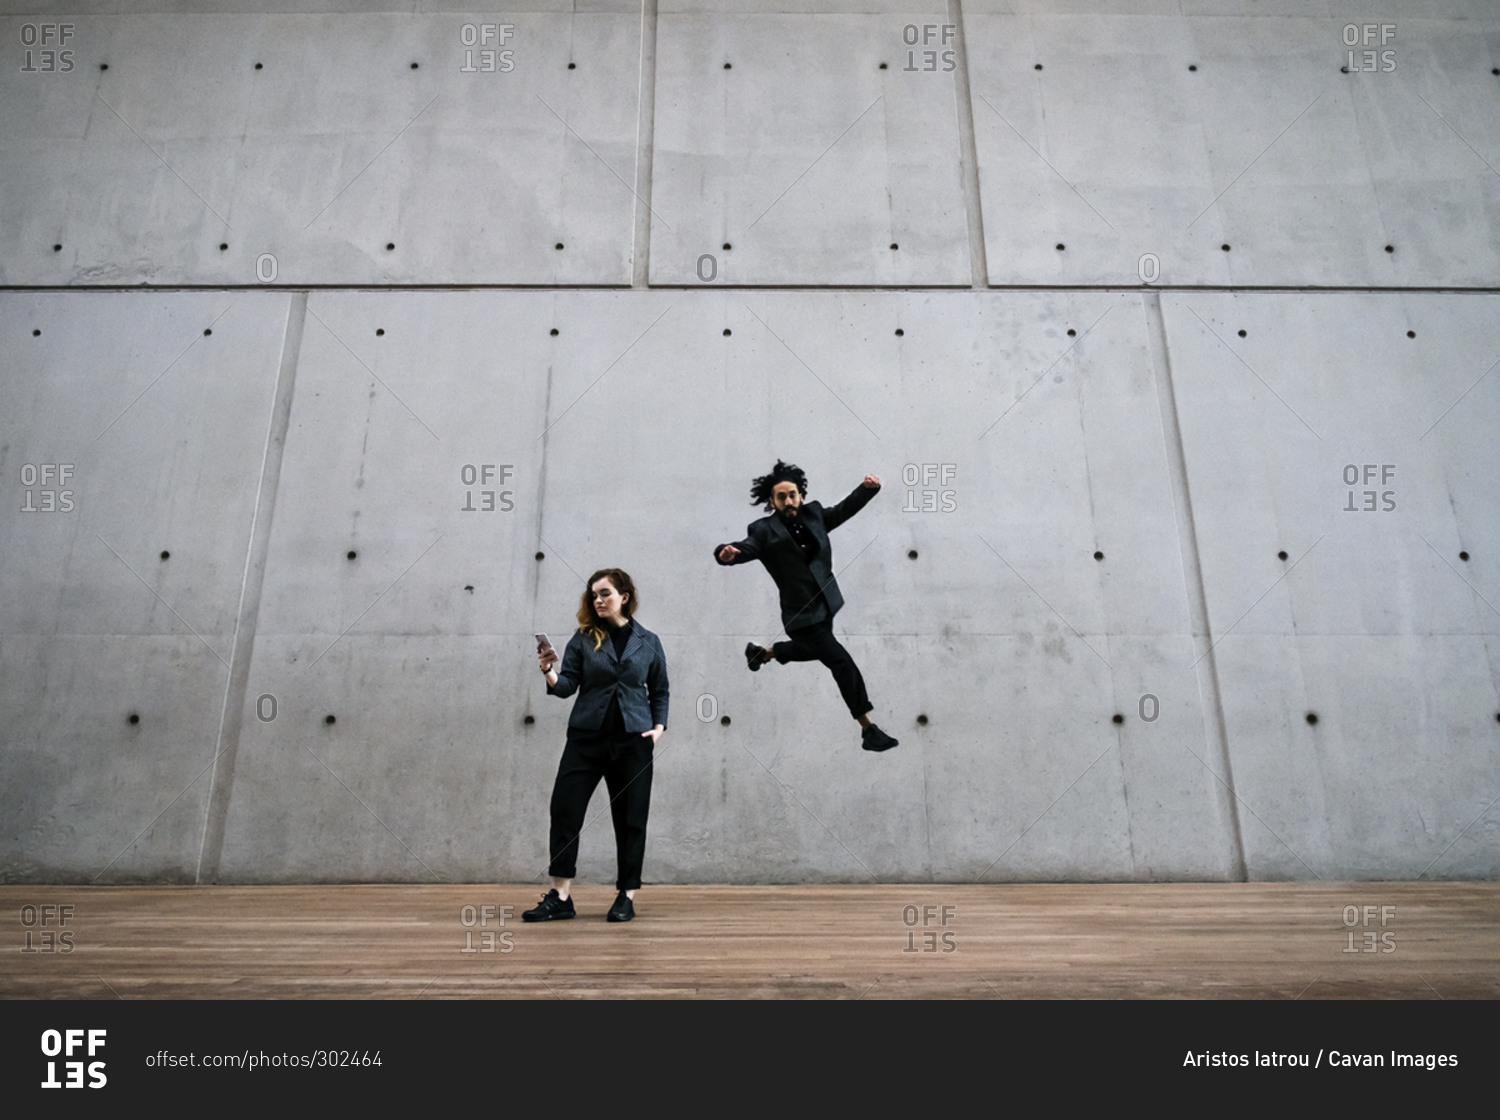 Man doing parkour behind a woman on a smartphone